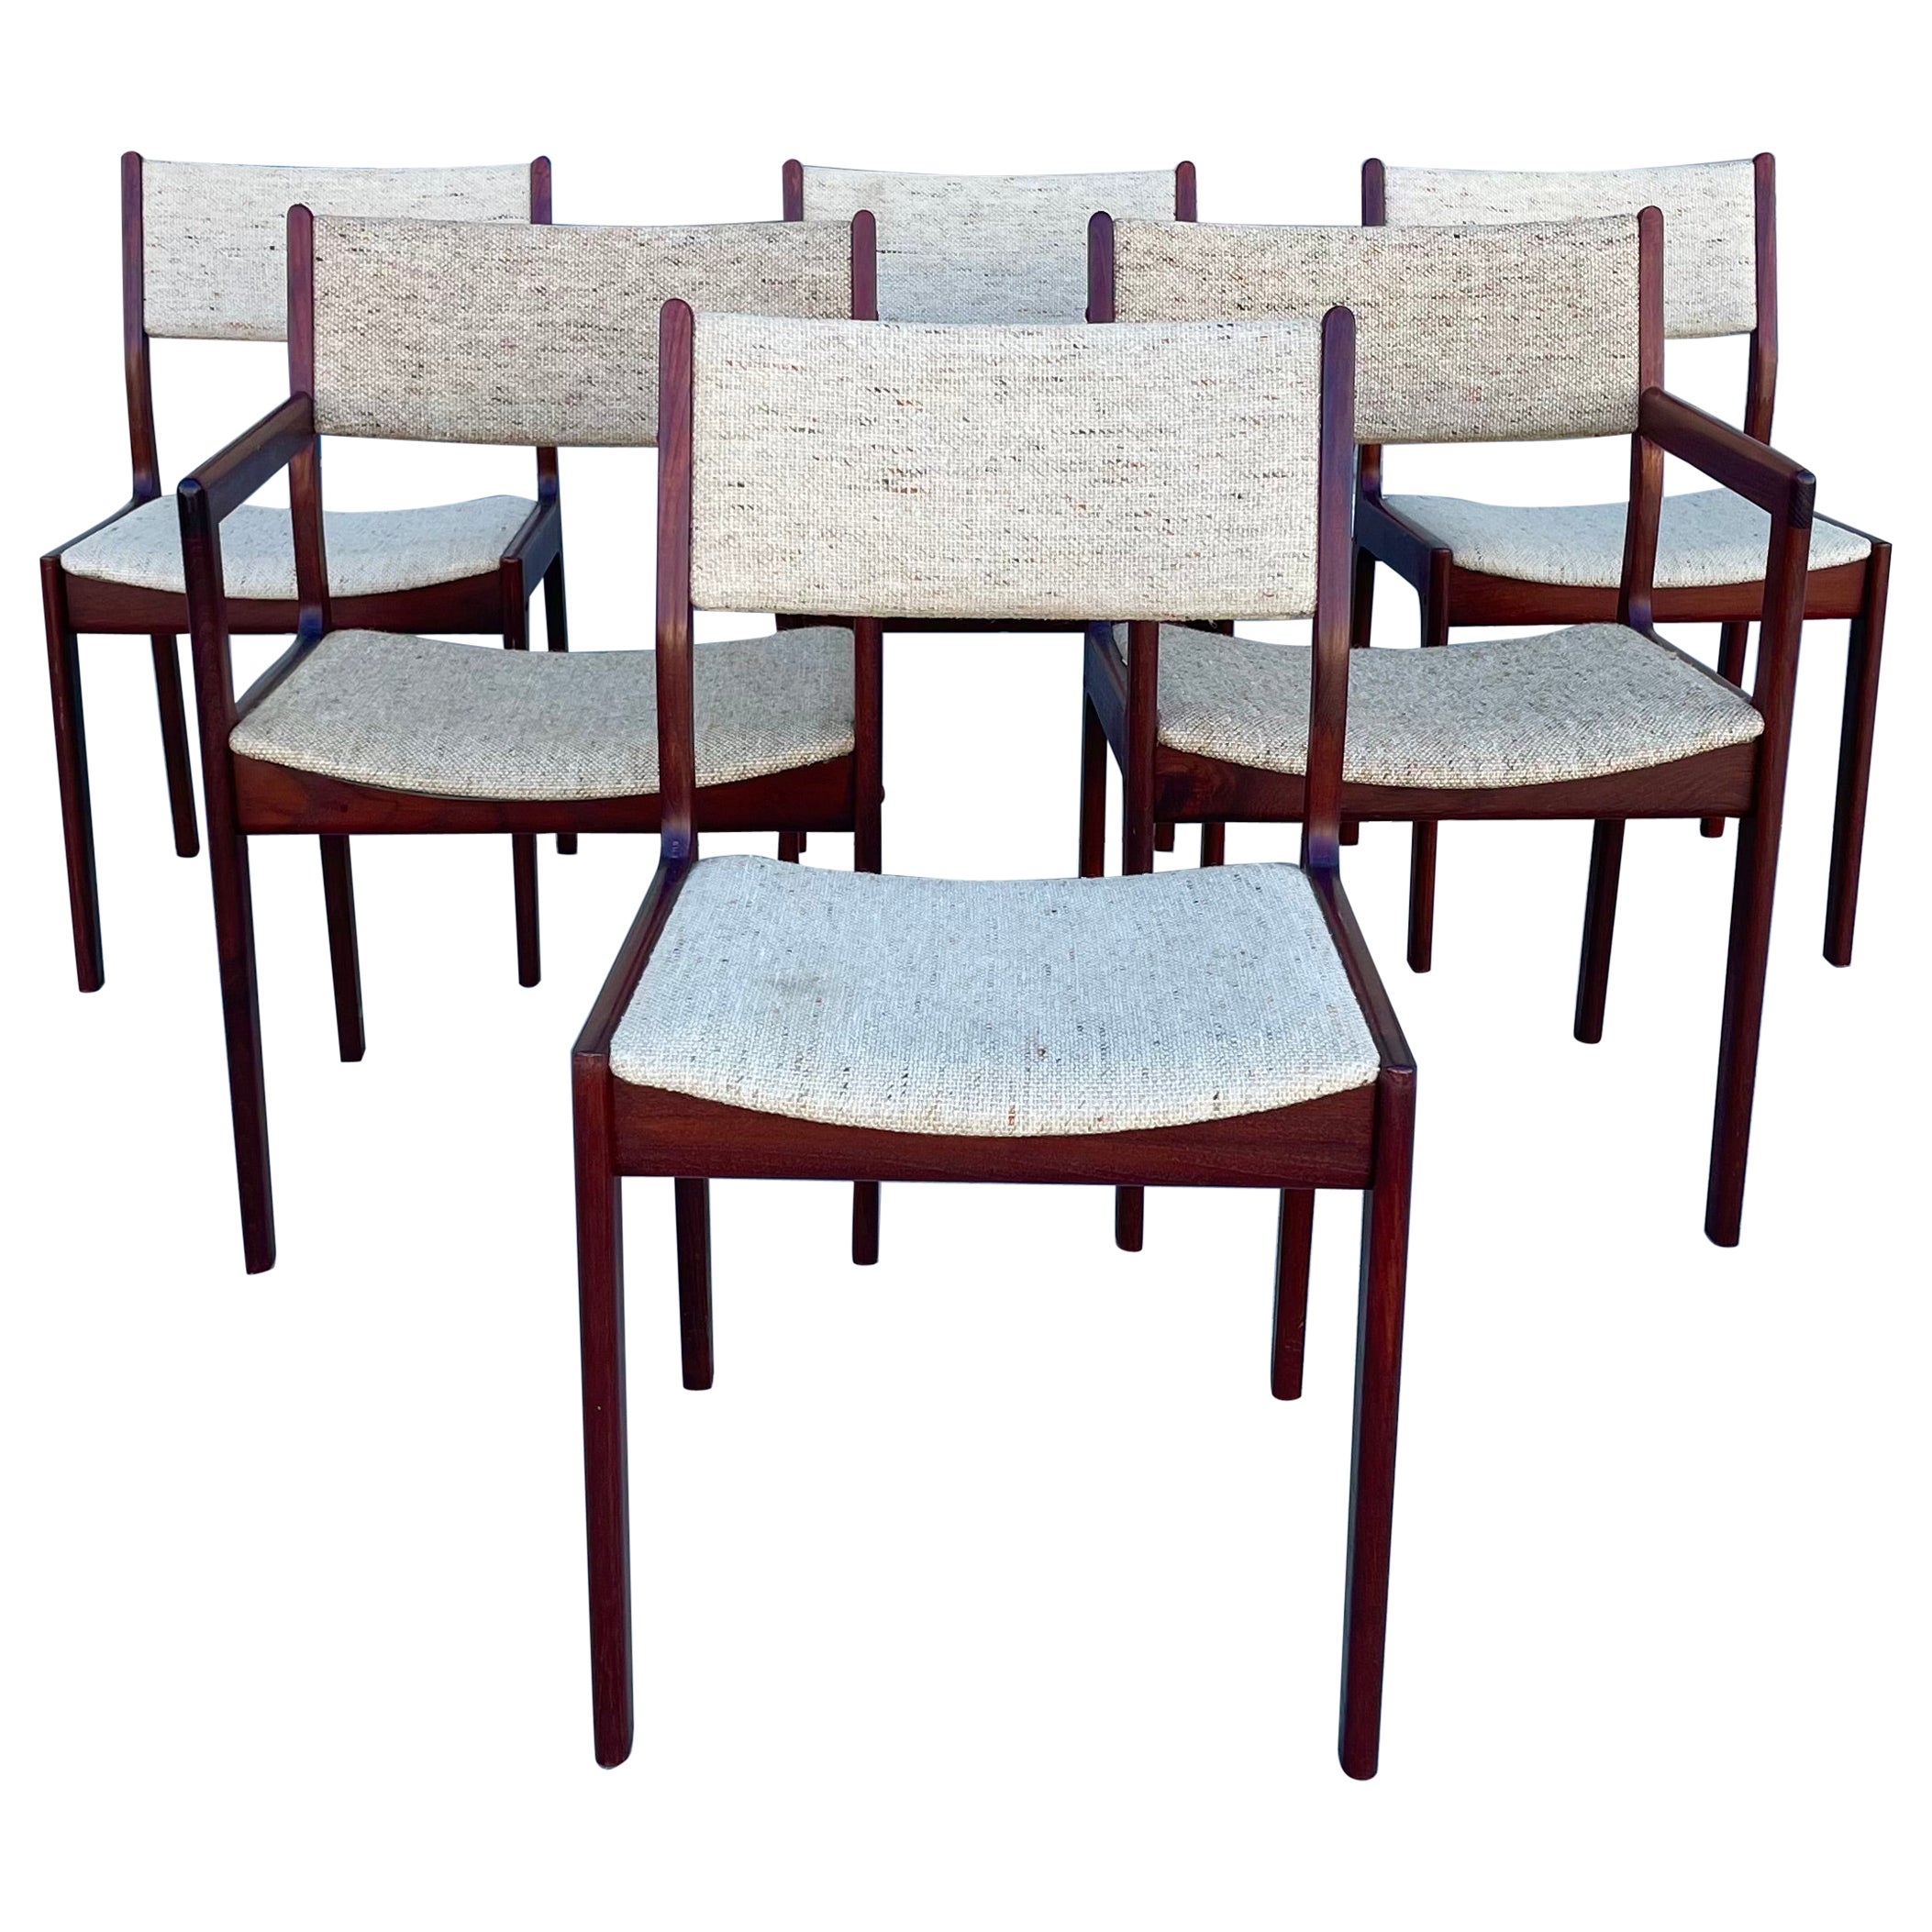 1960s Danish Modern Teak Dining Chairs - Set of 6 For Sale